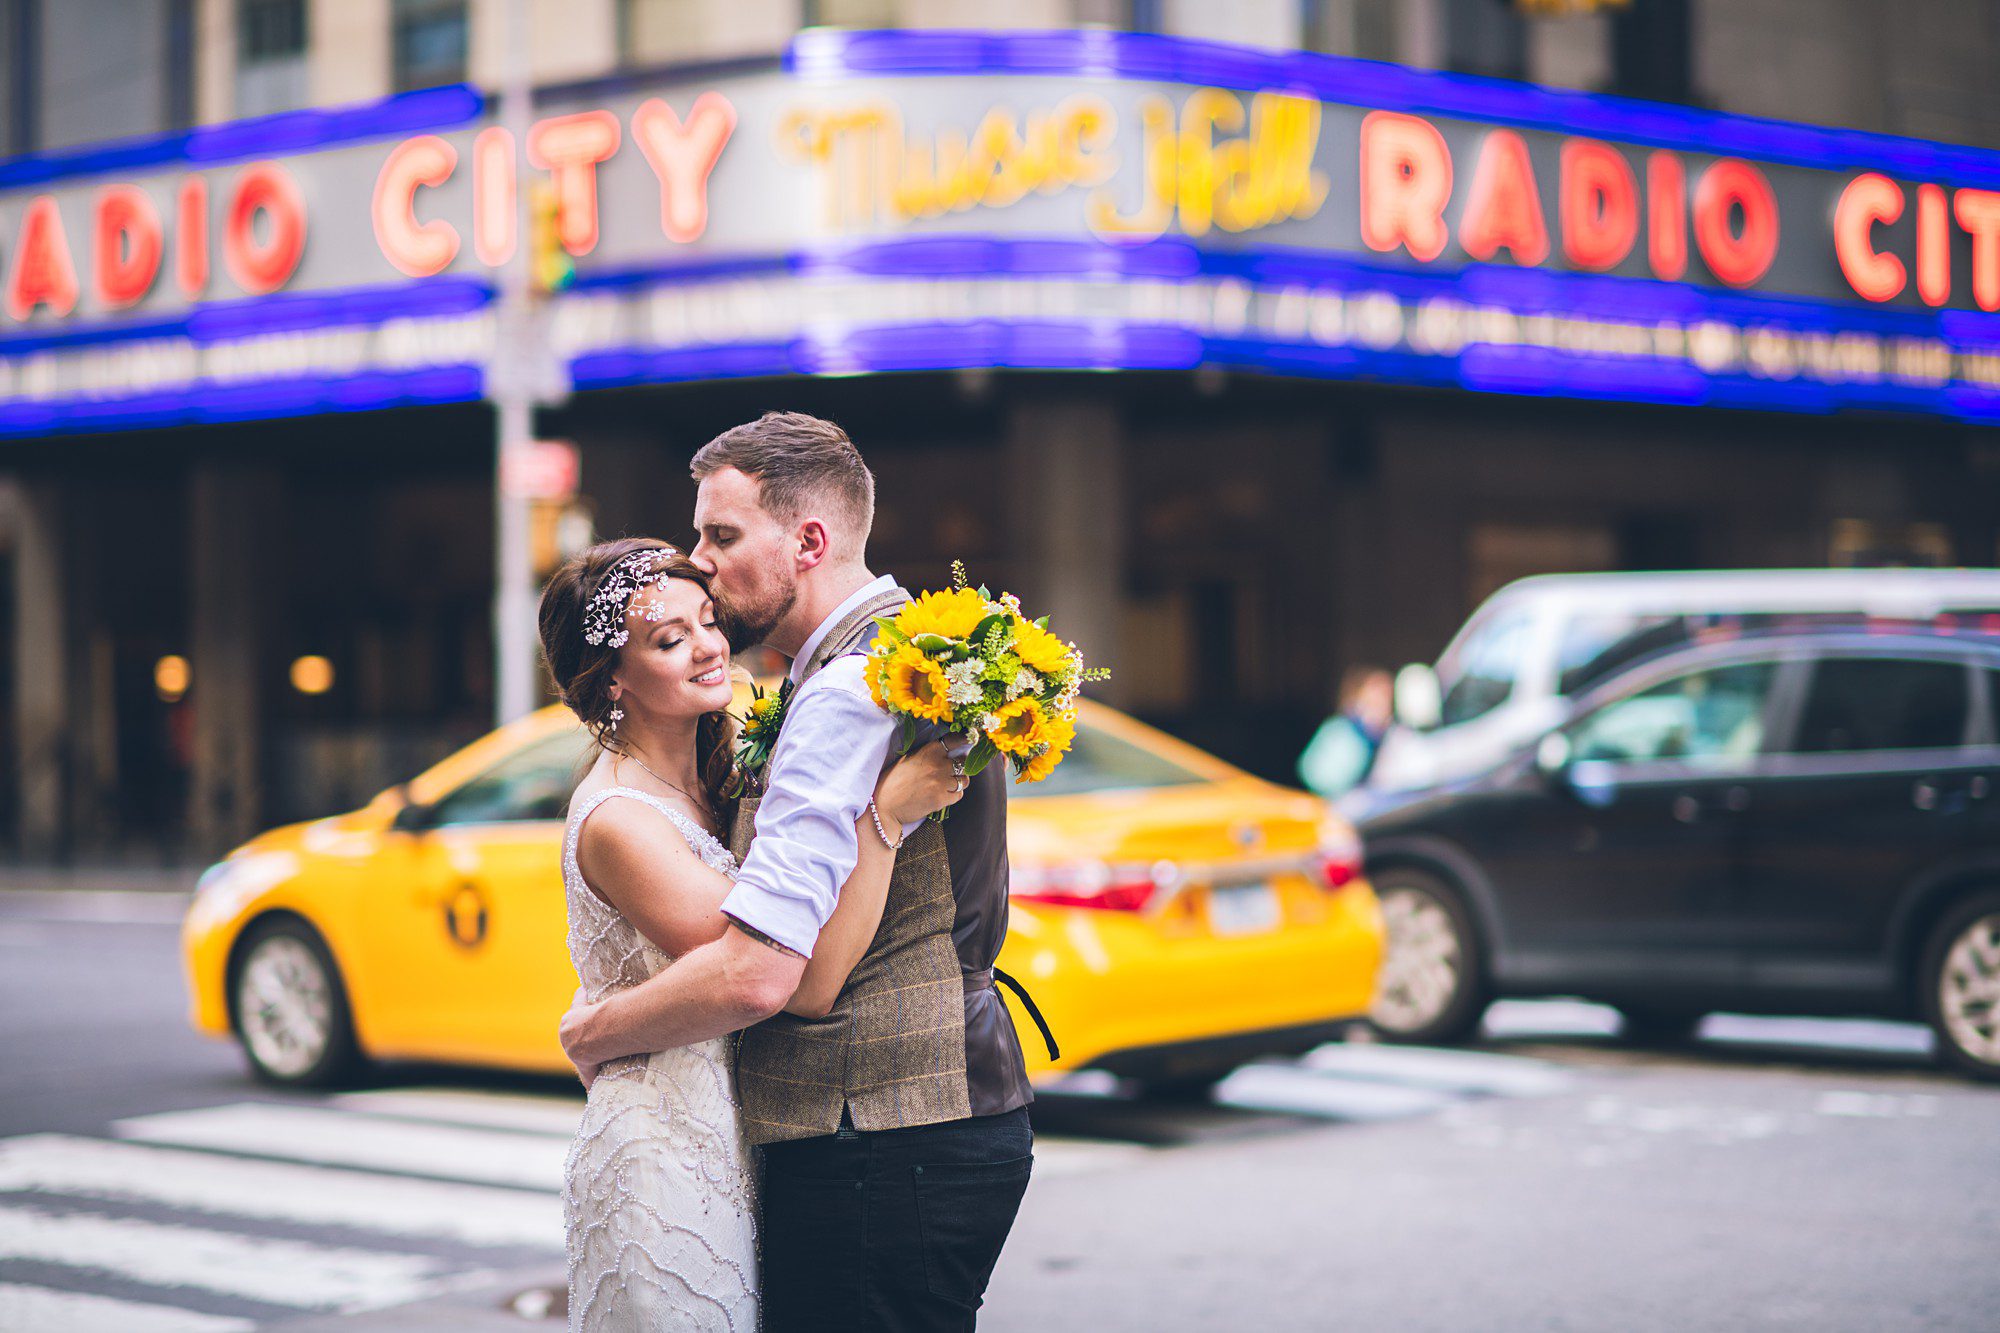 Wedding Couple in front of the Radio City Music Hall in New York